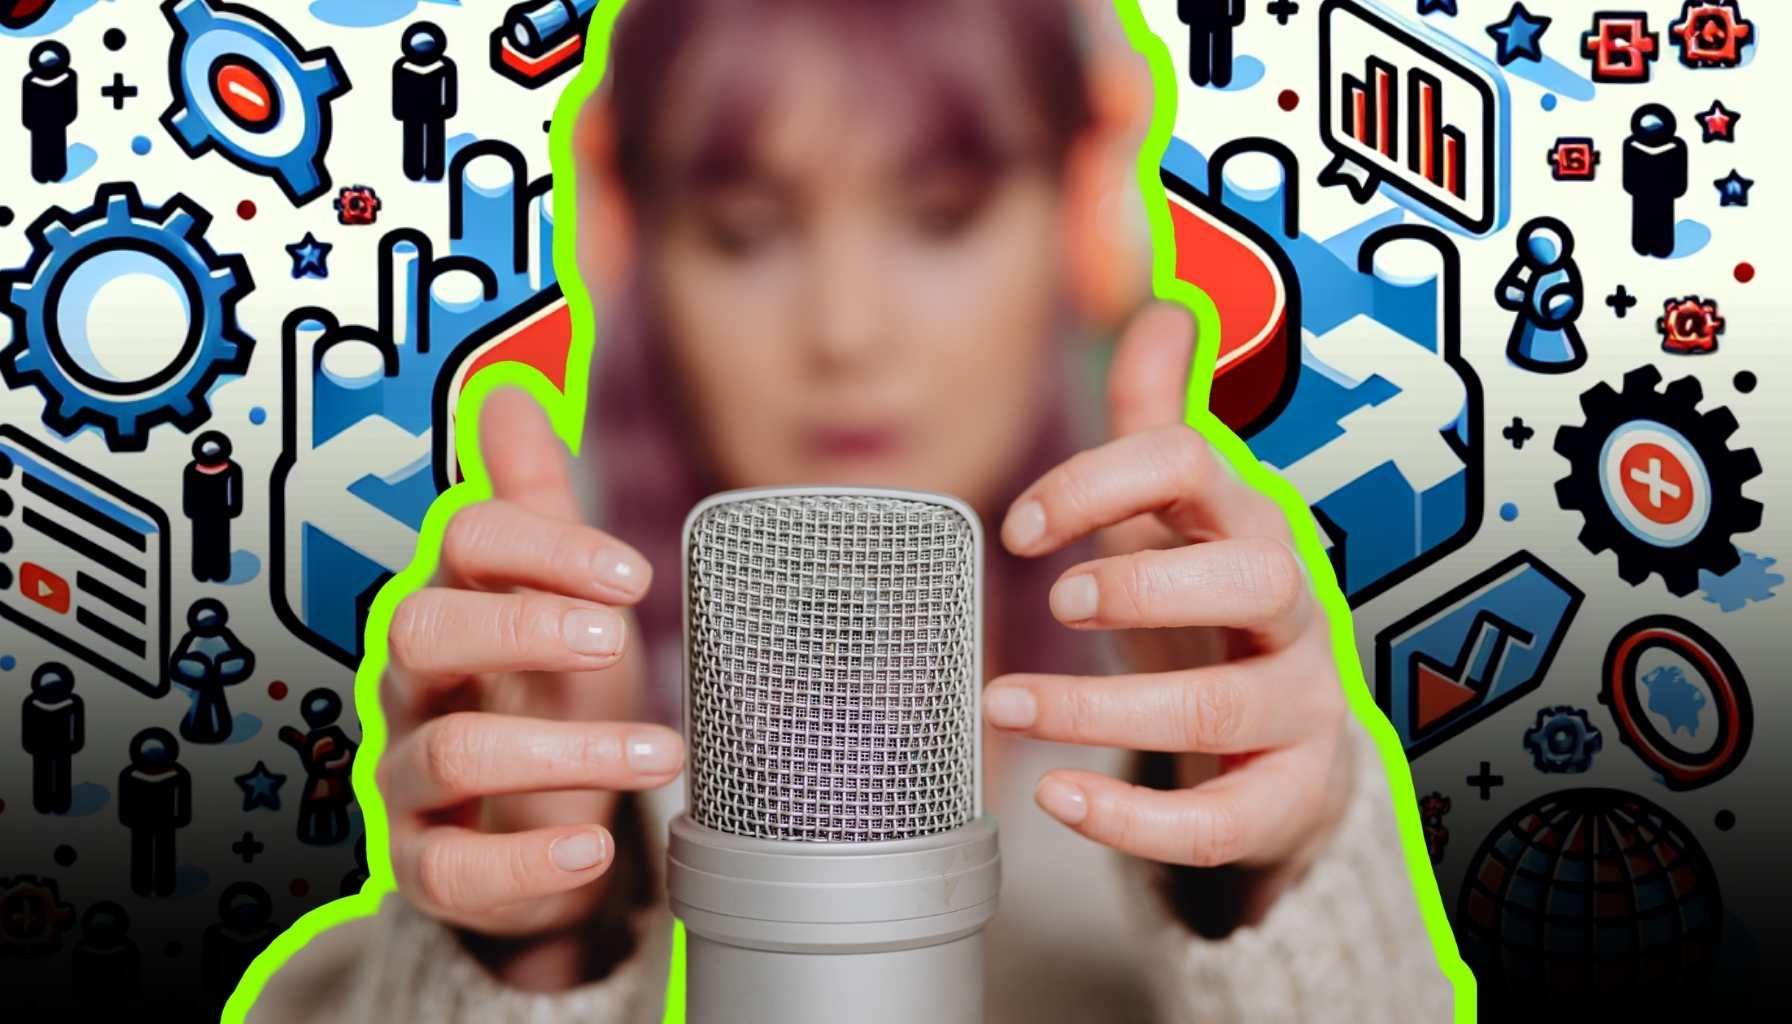 youtube ASMR creator in front of microphone making weird ASMR sounds for the internet on her Shure microphone